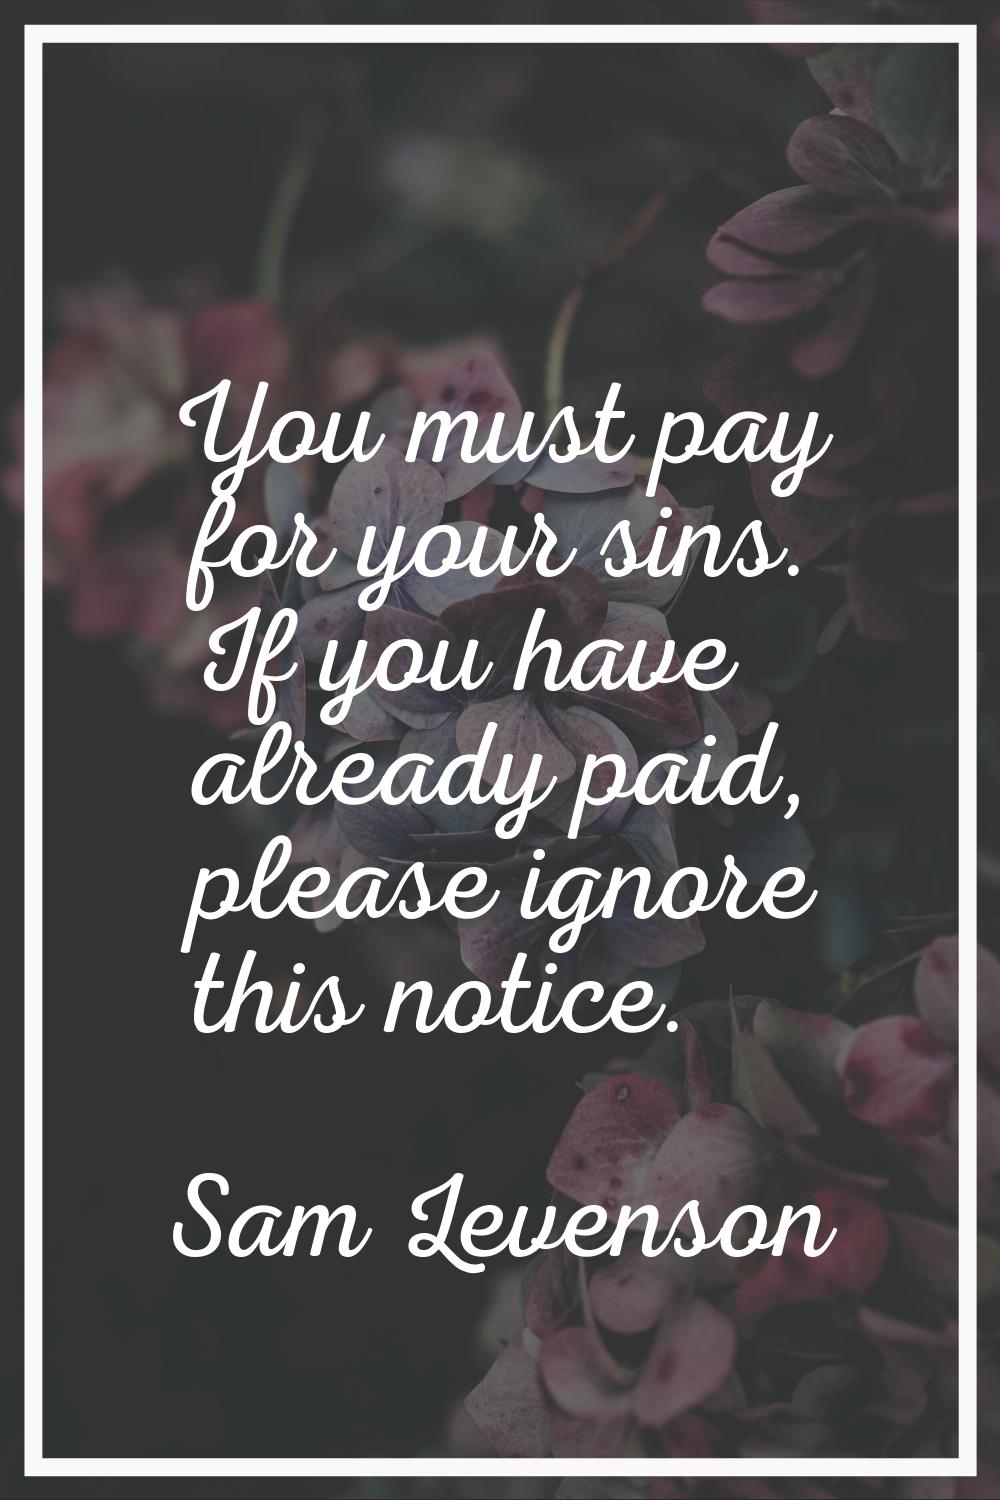 You must pay for your sins. If you have already paid, please ignore this notice.